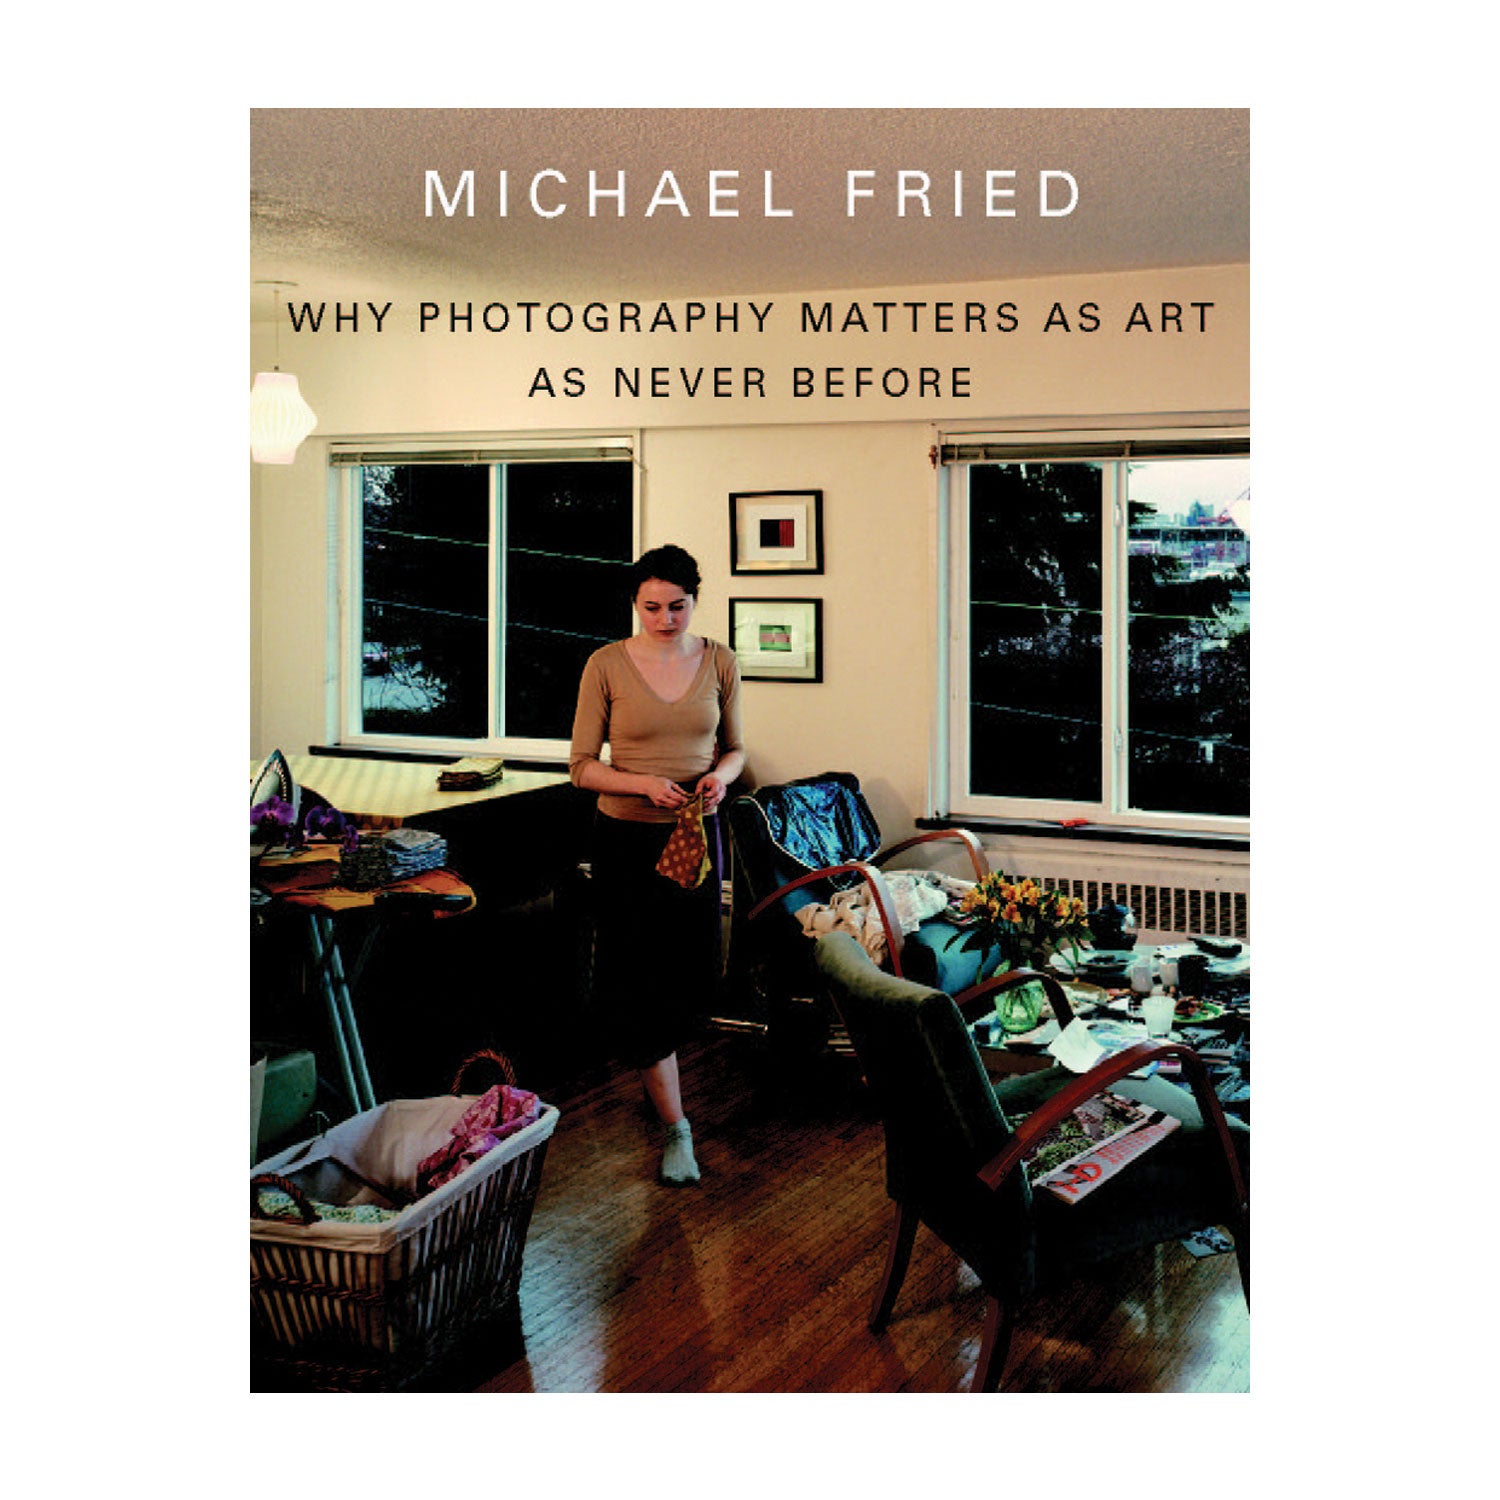 Why Photography Matters as Art as Never Before by Michael Fried Photo Museum Ireland